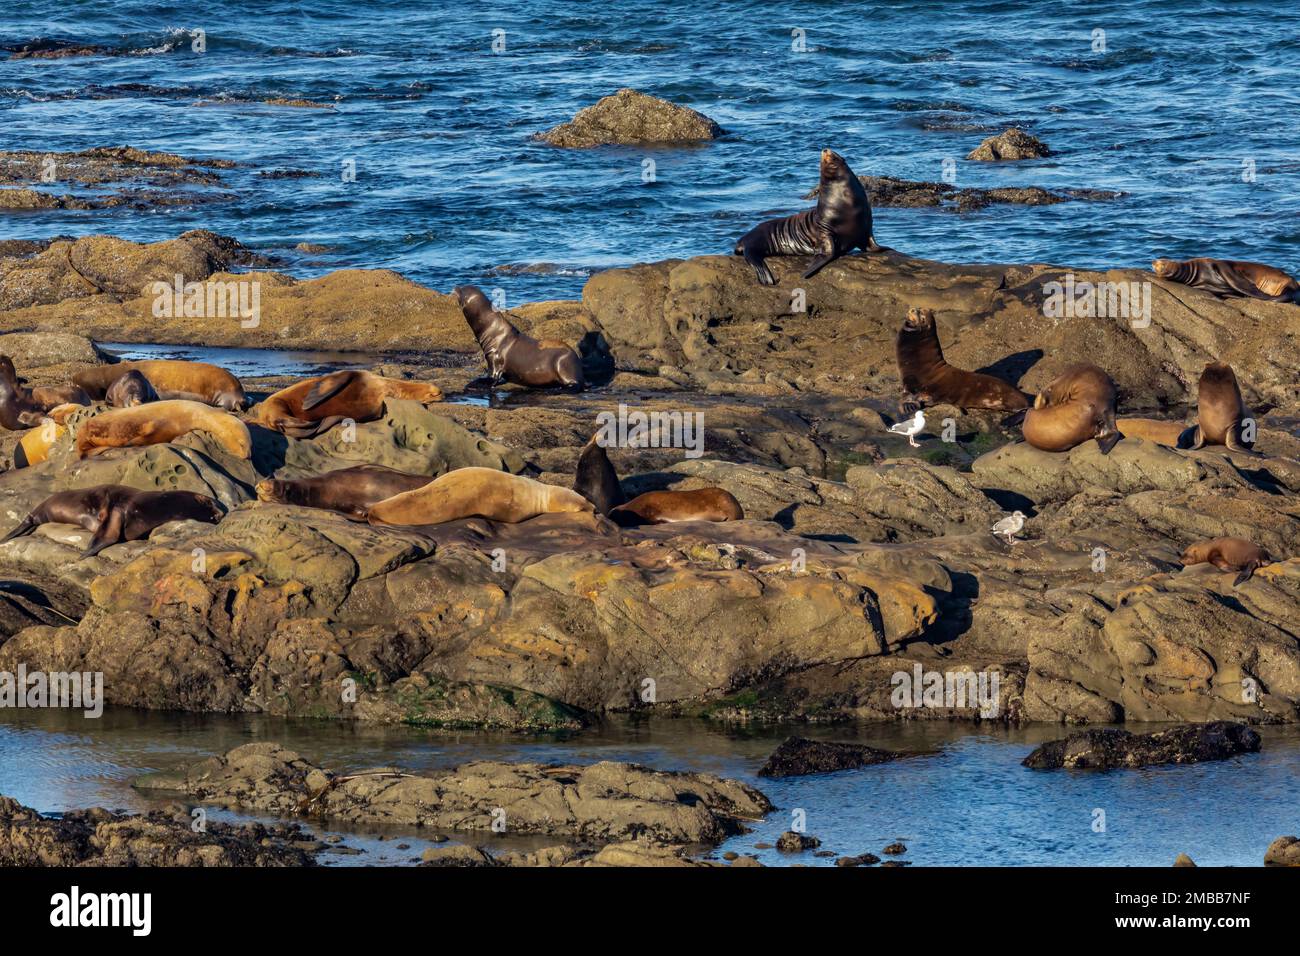 Haulout of California and Steller Sea Lions, and Northern Elephant Seals, Shell Island area of Cape Arago State Park on the Oregon Coast, USA Stock Photo